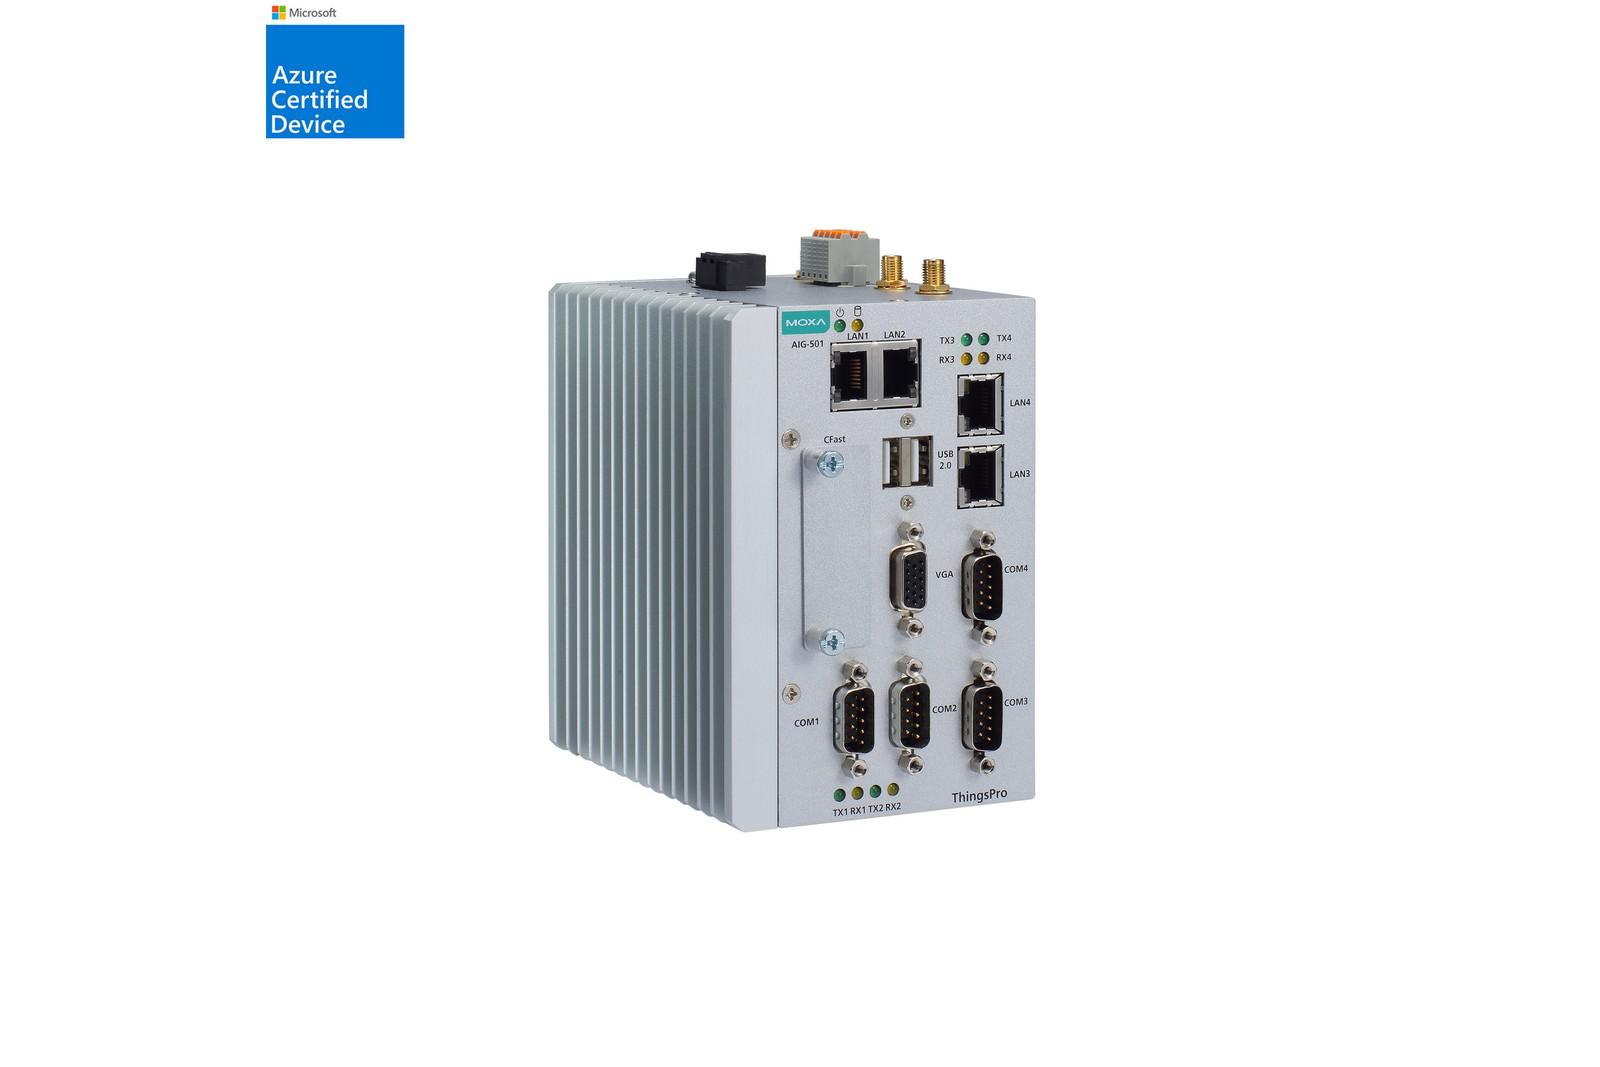 AIG-500 Series Advanced IIoT gateways with Intel Atom® quad-core 1.91 GHz processor, 1 VGA port, ThingsPro Edge software, -40 to 70°C operating temperature